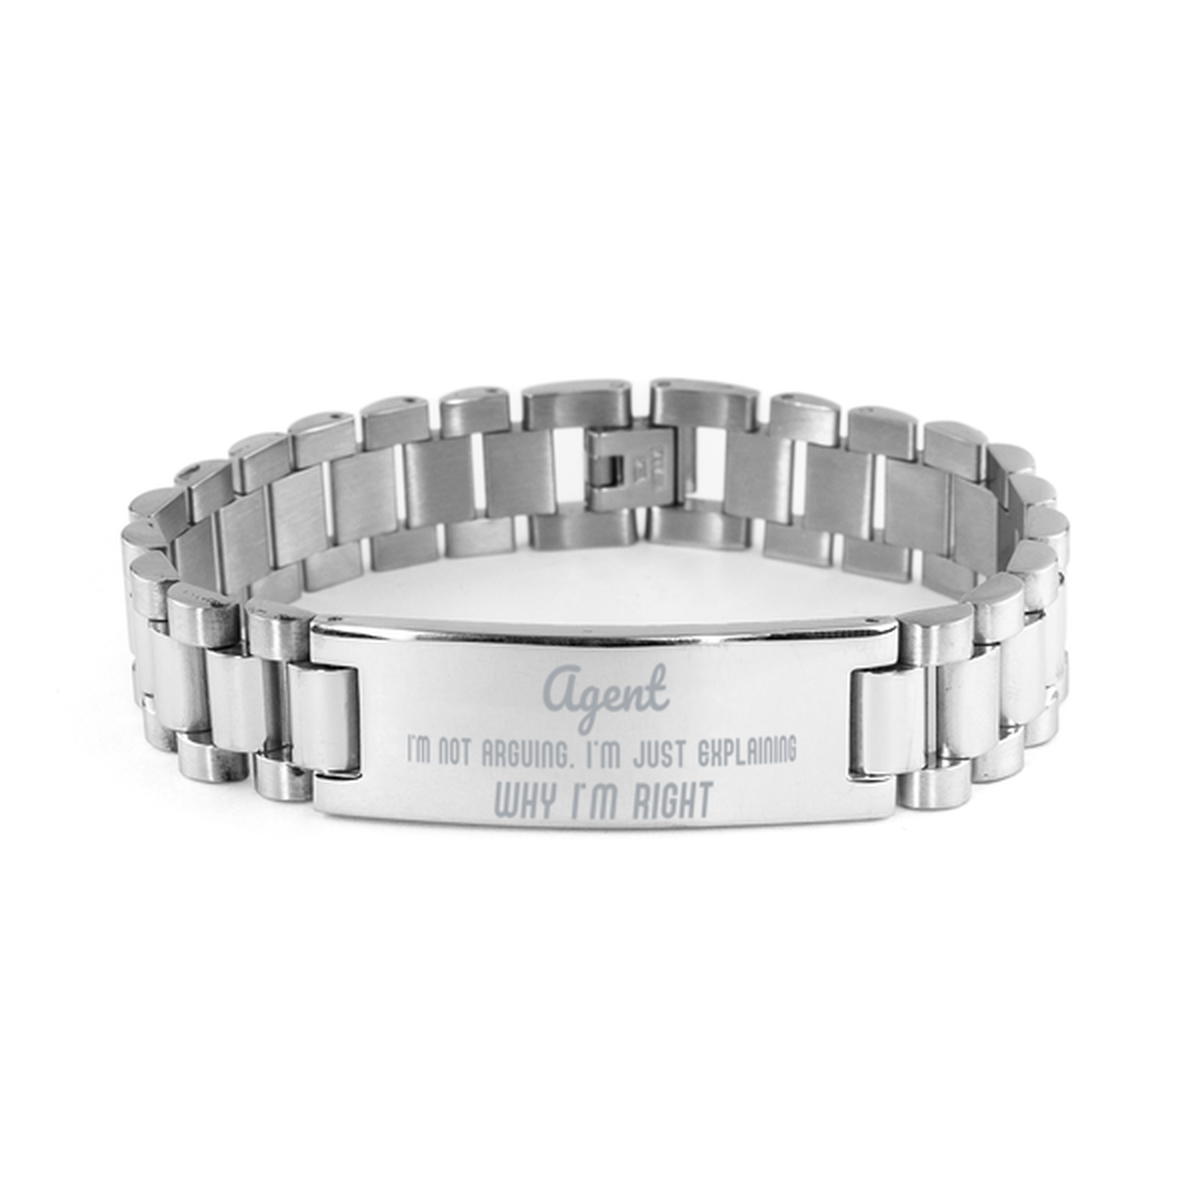 Agent I'm not Arguing. I'm Just Explaining Why I'm RIGHT Ladder Stainless Steel Bracelet, Graduation Birthday Christmas Agent Gifts For Agent Funny Saying Quote Present for Men Women Coworker